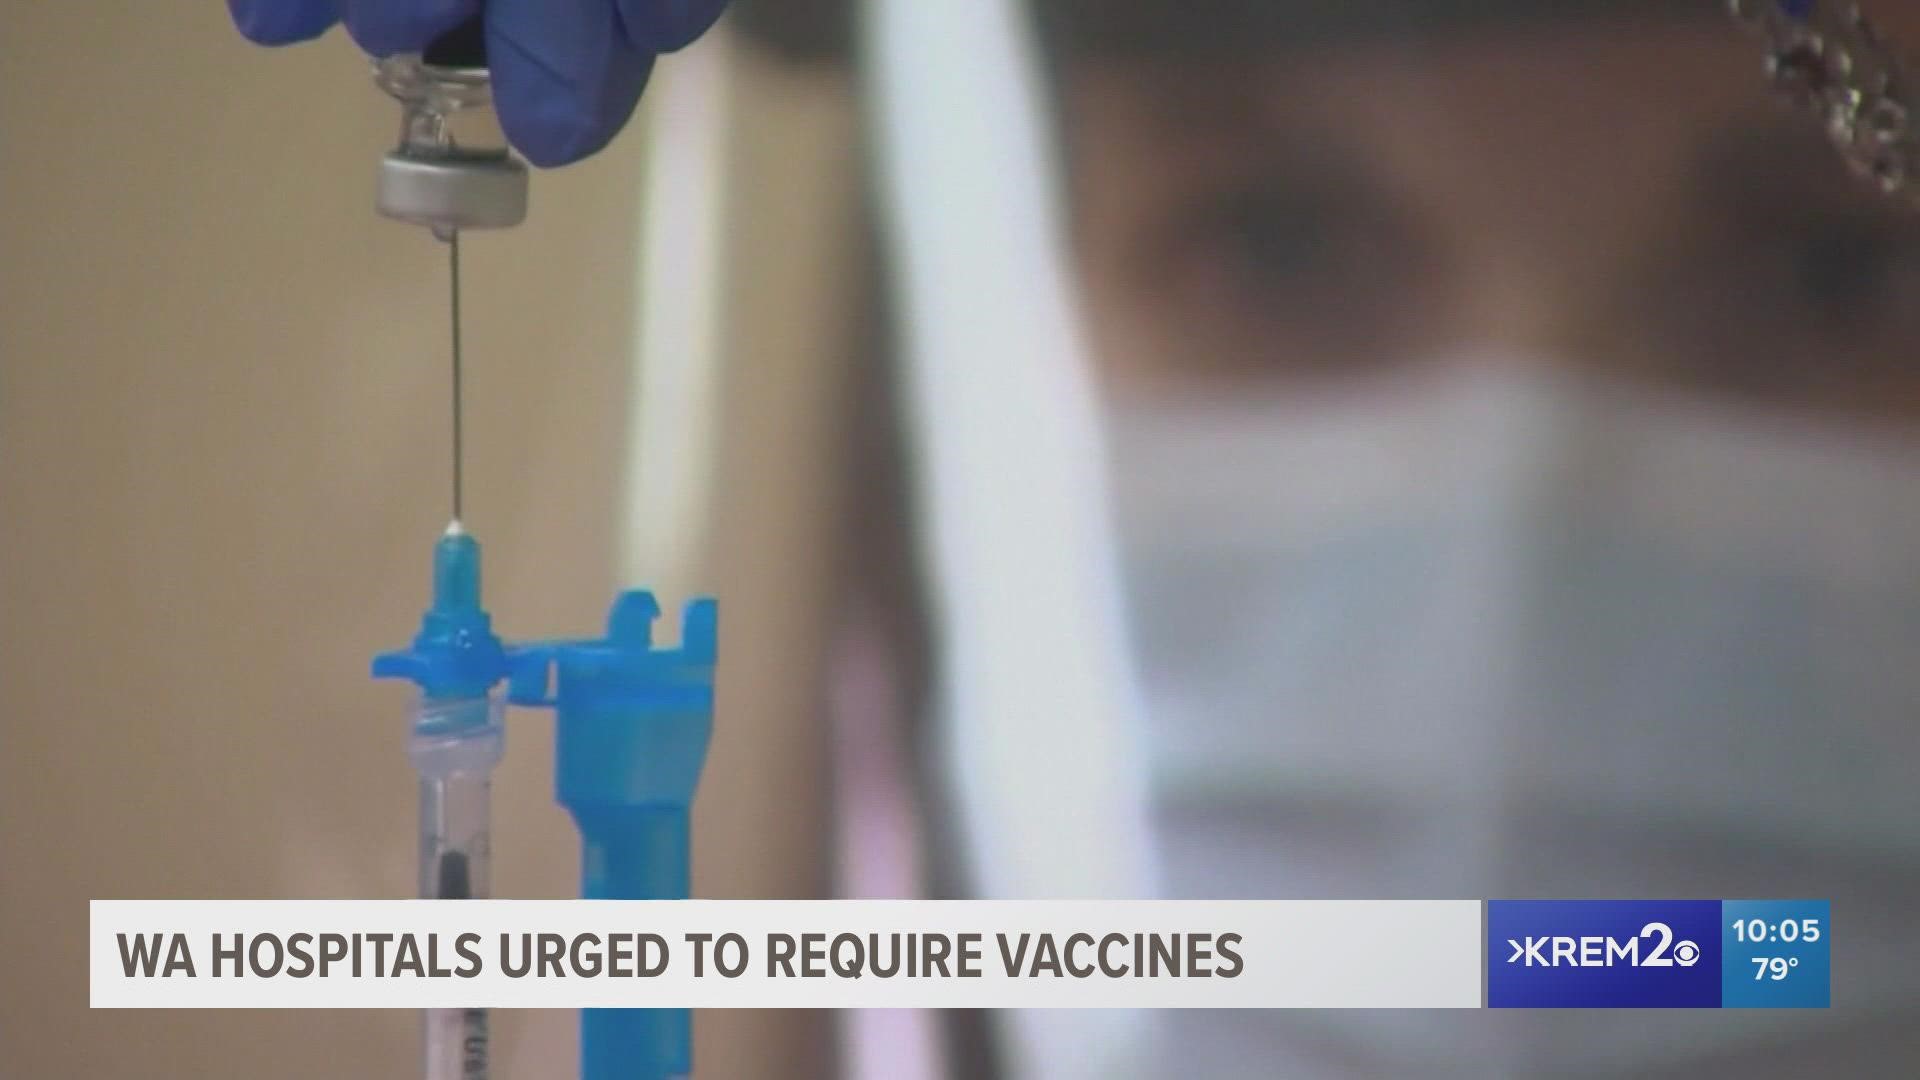 According to MultiCare, they will treat this vaccine similarly to the flu vaccine, which has been a condition of employment for several years.